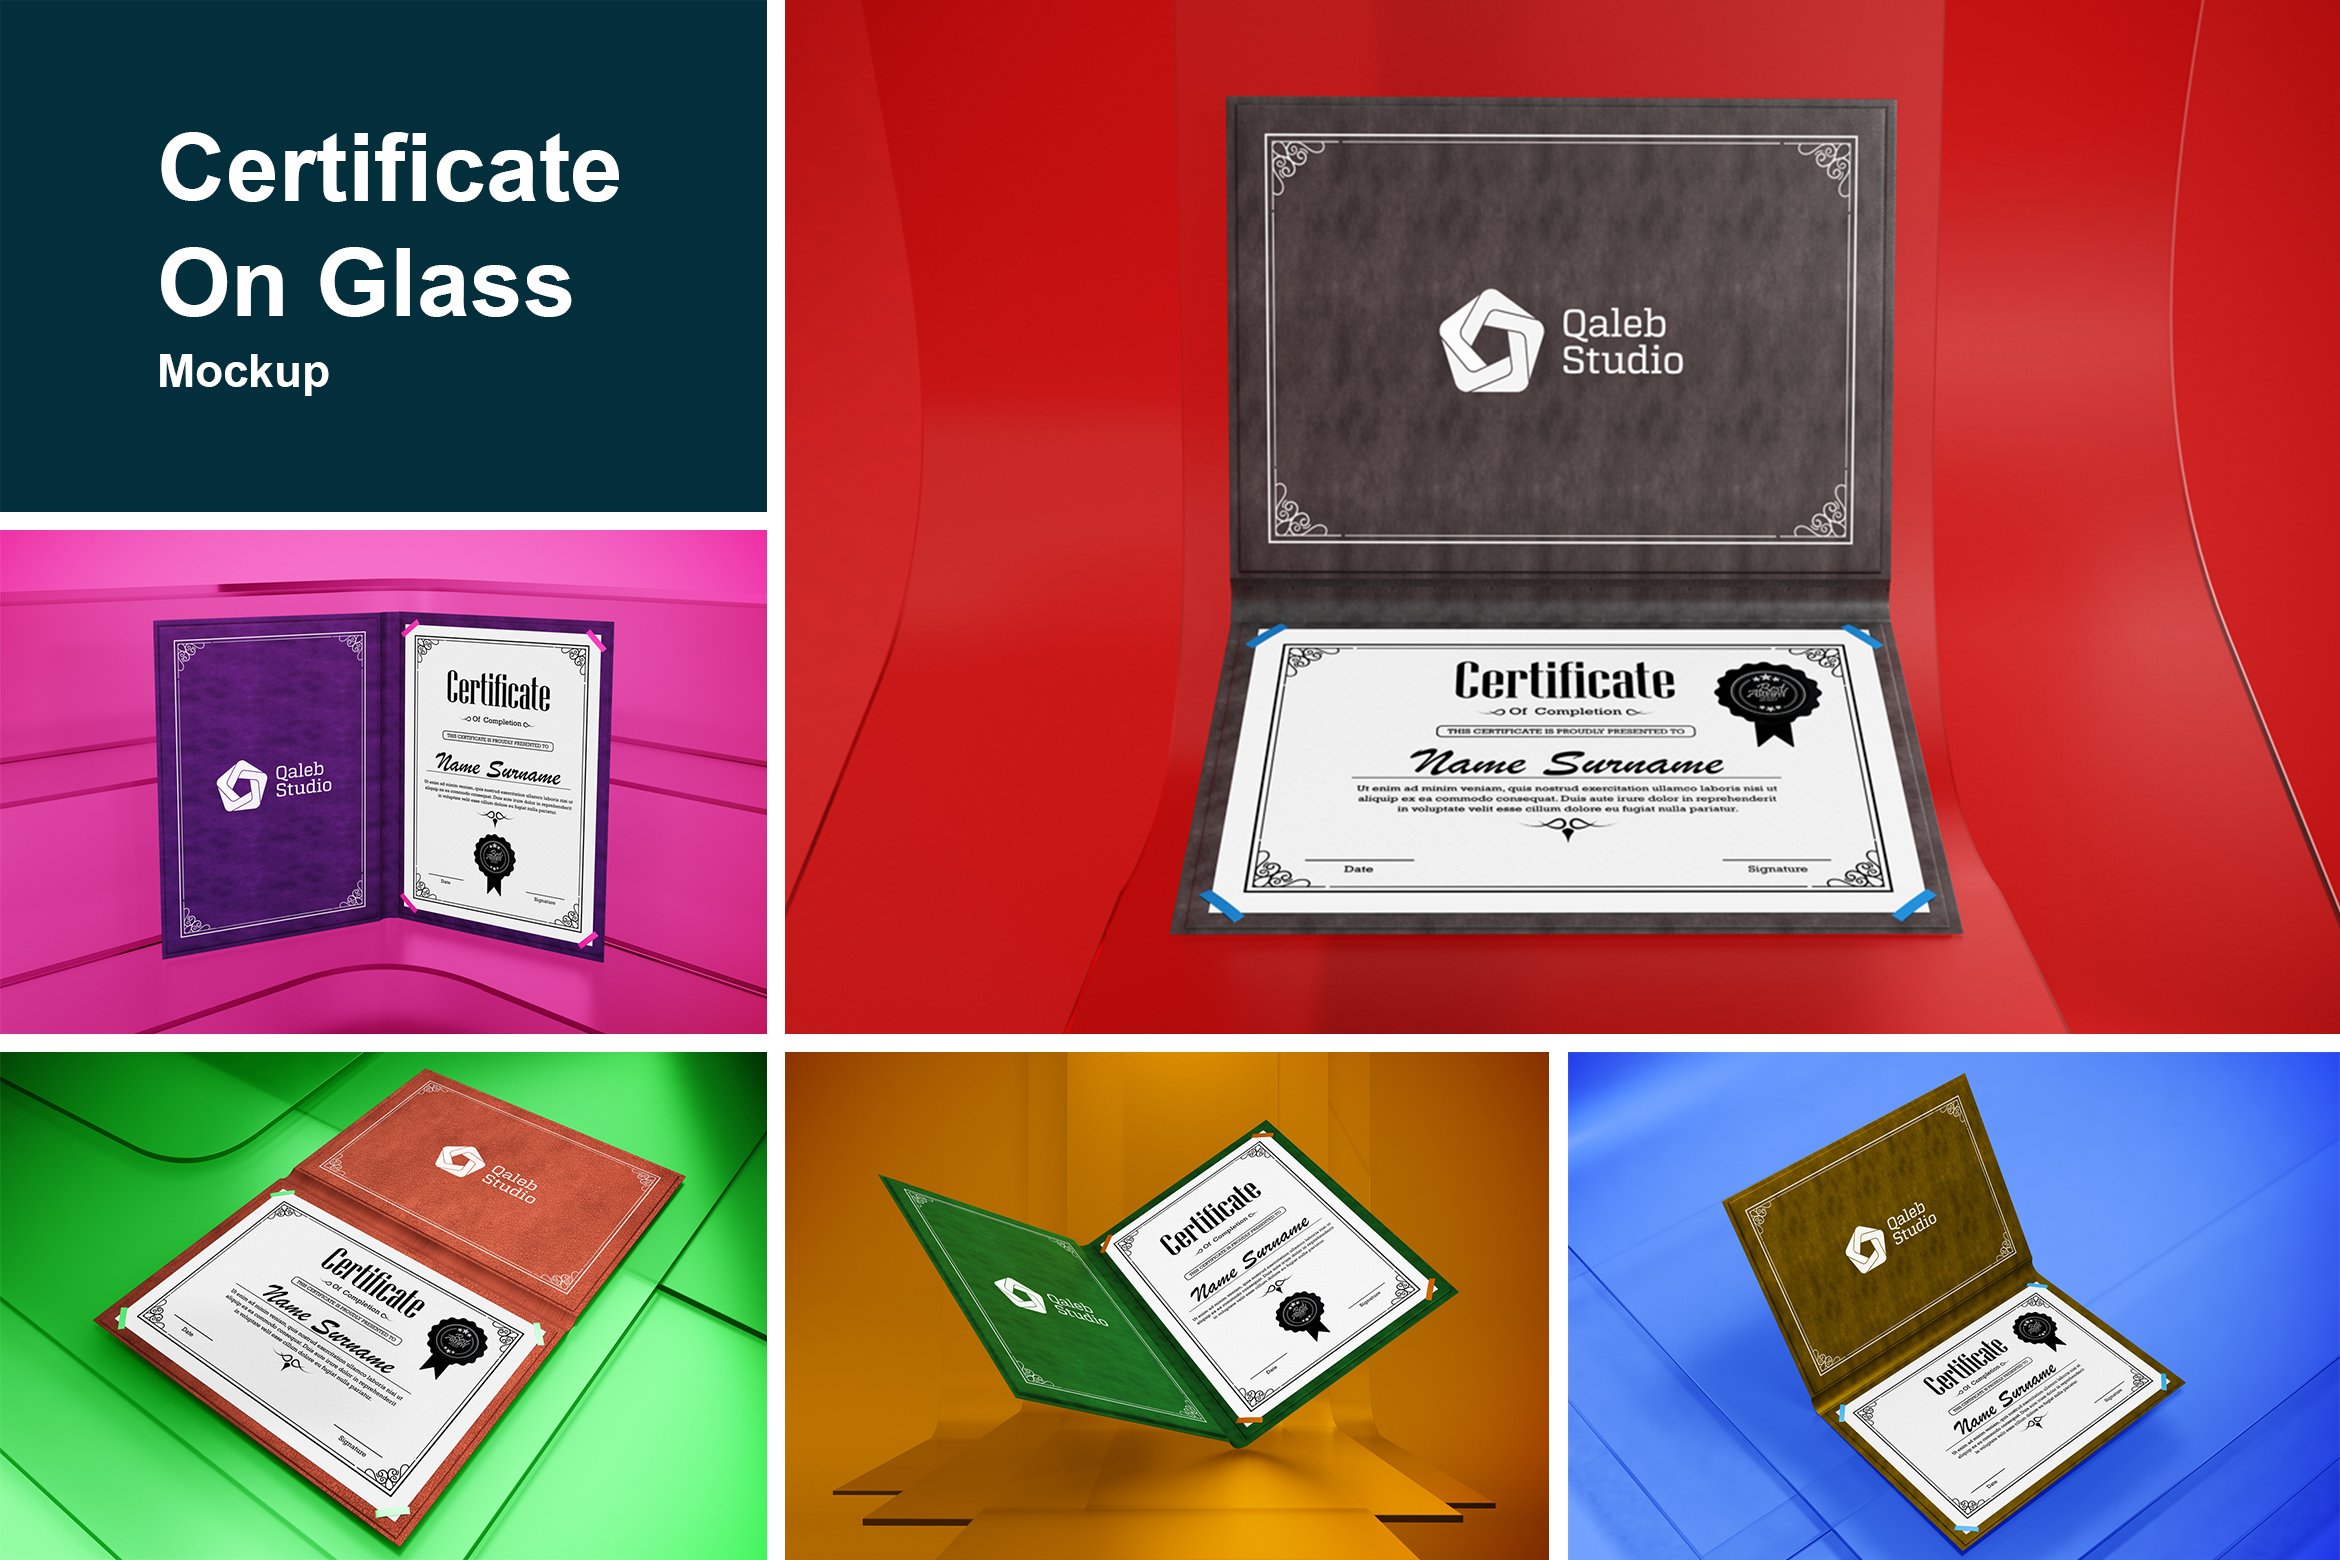 Certificate On Glass Mockup cover image.